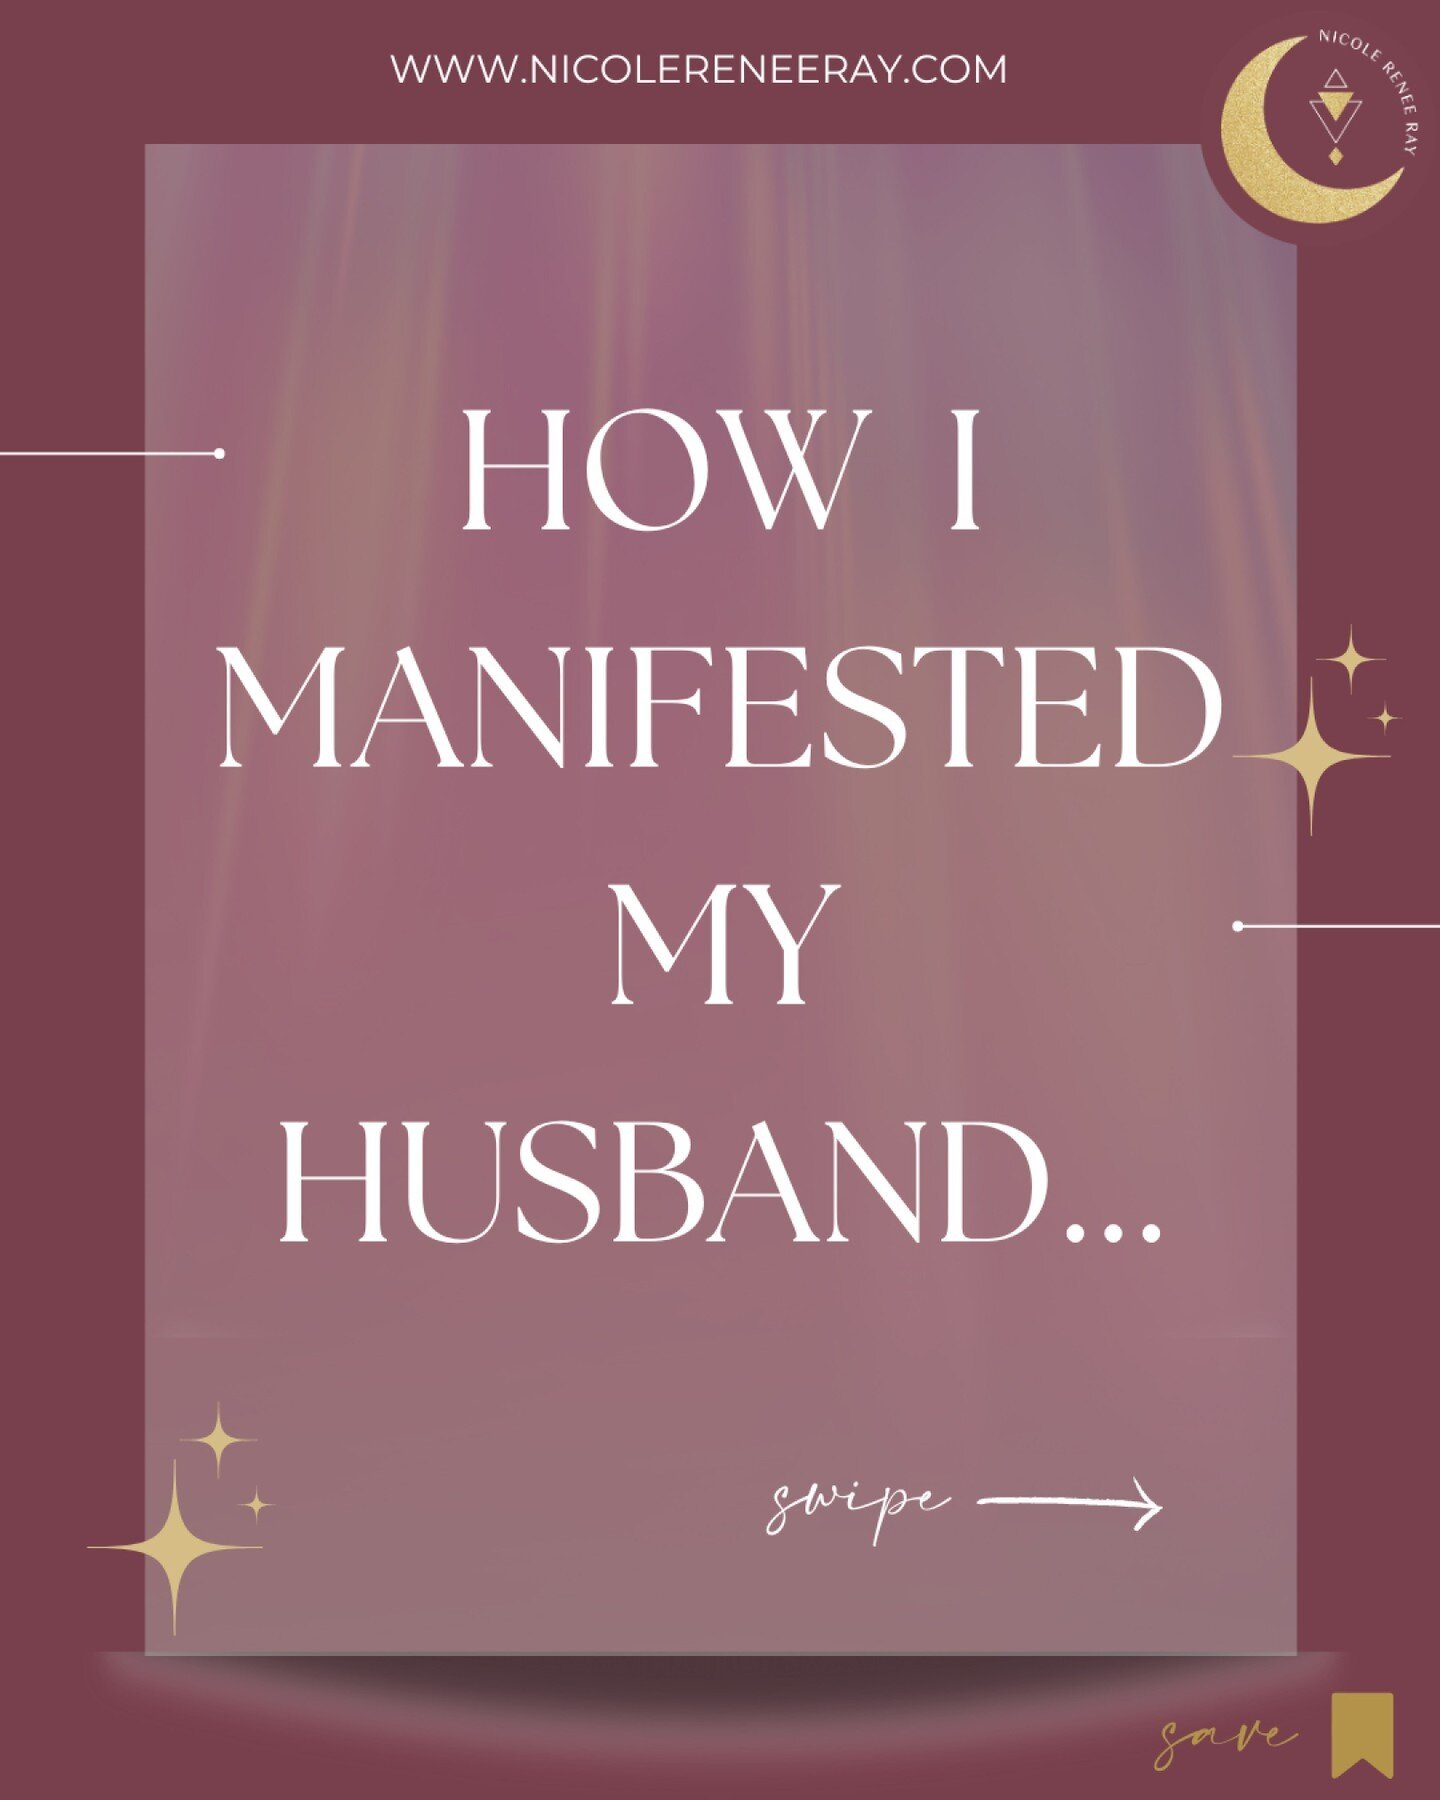 Manifest the One is at a very special price through Valentines Day! 

DM &quot;Love&quot; and I'll send you the link!

The journey of manifesting my husband was truly transformative for me. 

It proved to me that this process of &quot;manifesting mas